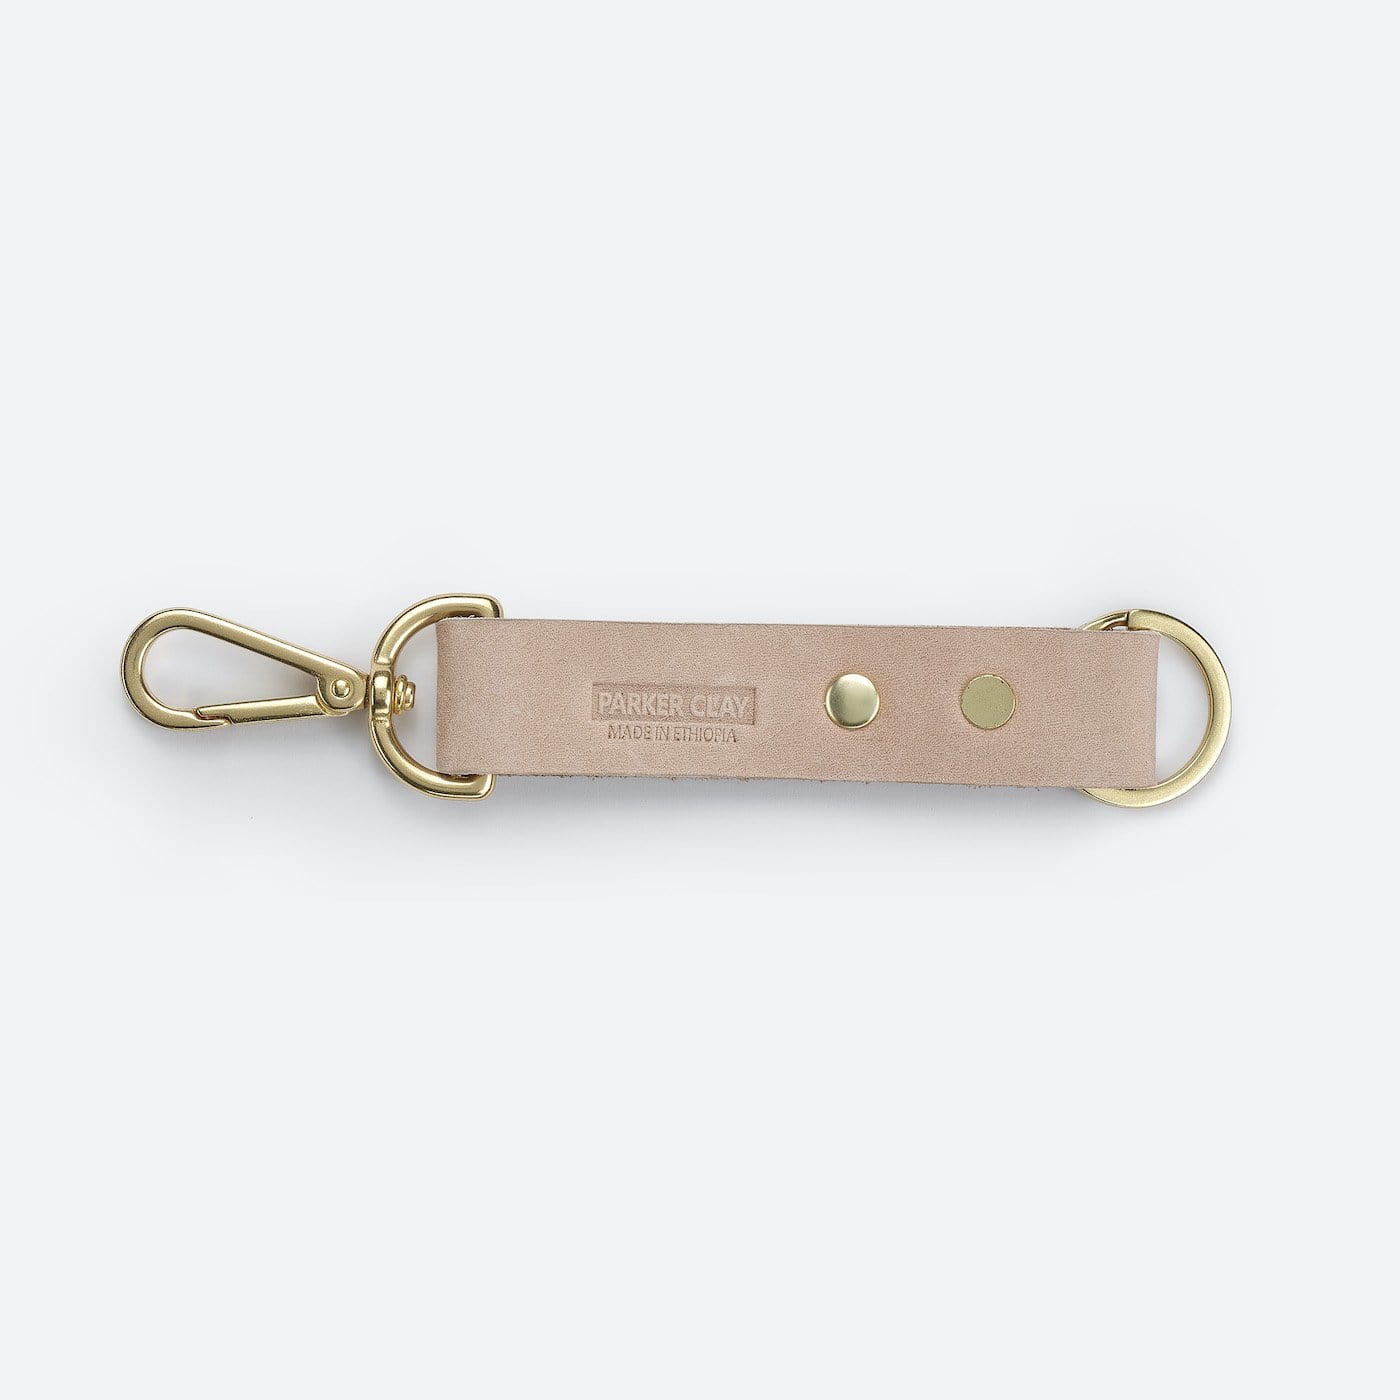 Sola Keychain - Parker Clay 